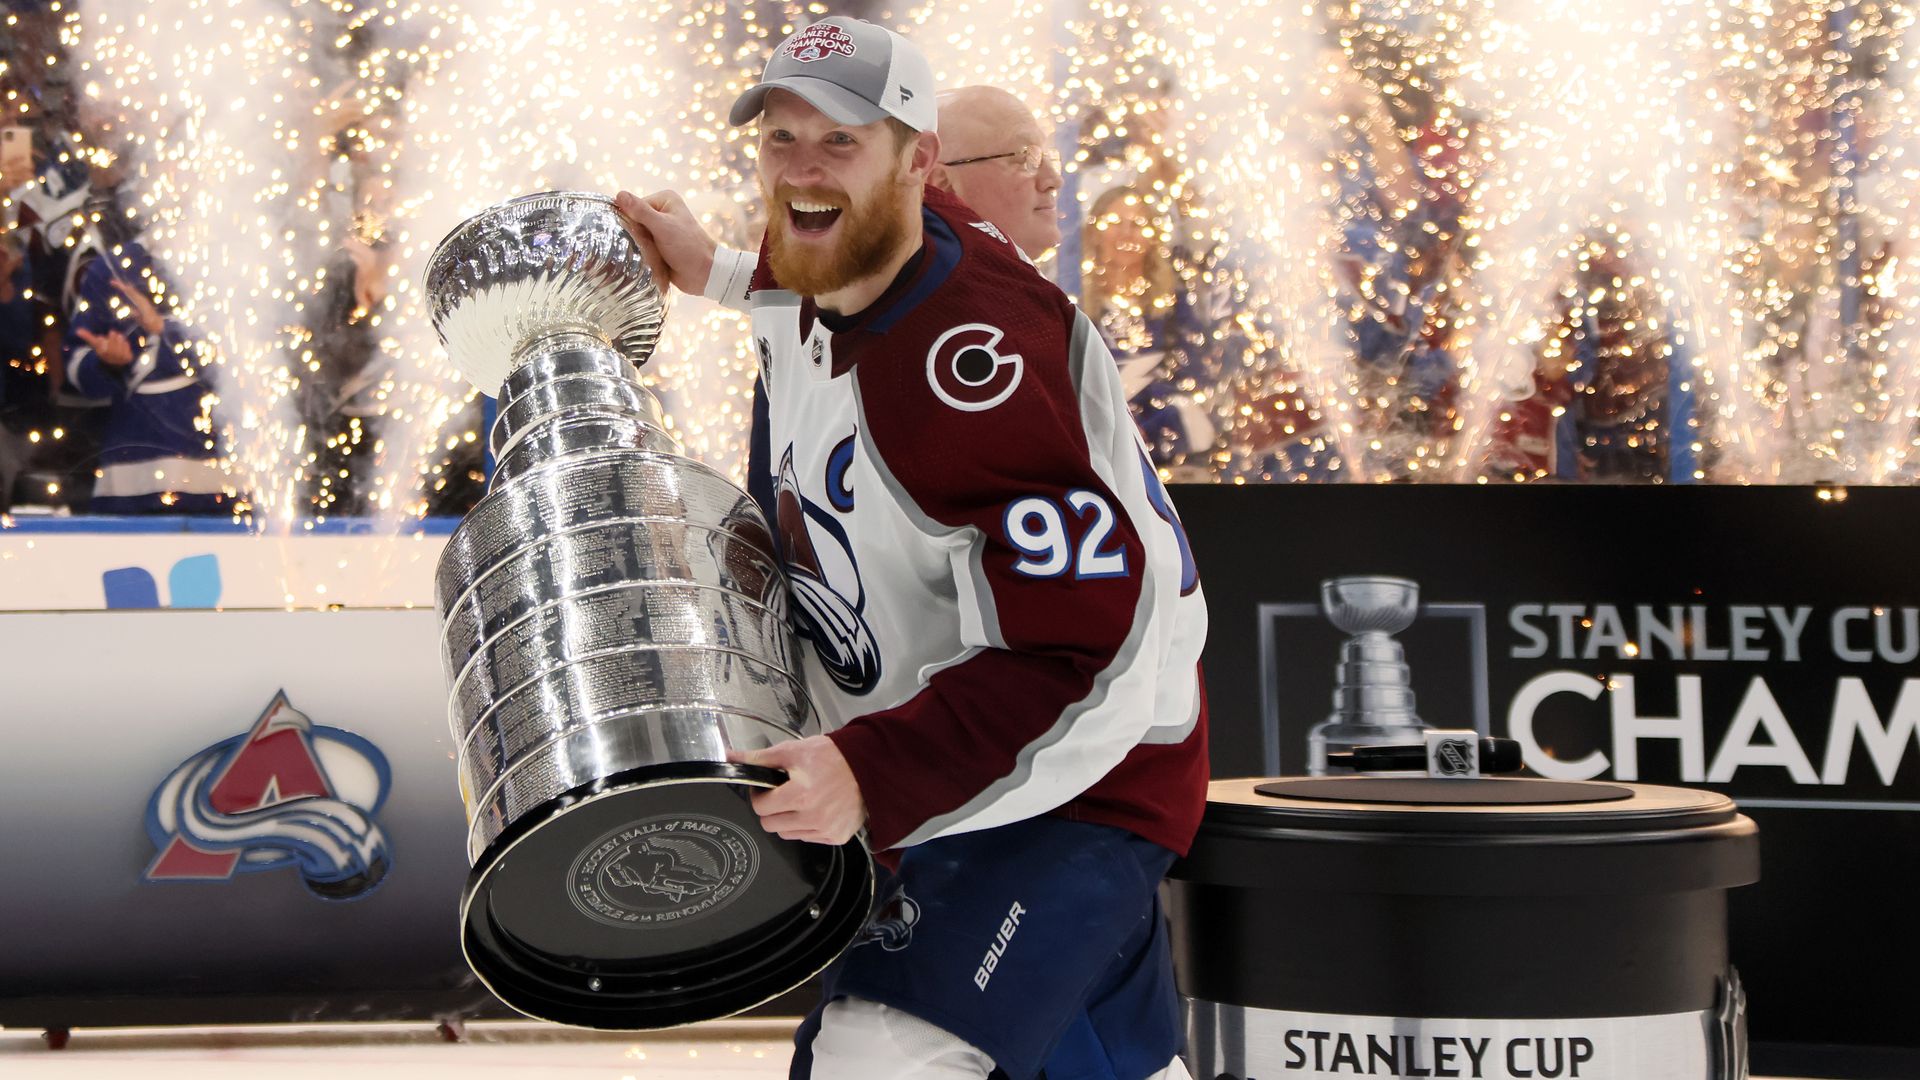 The Colorado Avalanche's 10-year veteran captain Gabe Landeskoglifts the Stanley Cup after defeating the Tampa Bay Lightning in the 2022 NHL Stanley Cup Final. Photo by Bruce Bennett/Getty Images